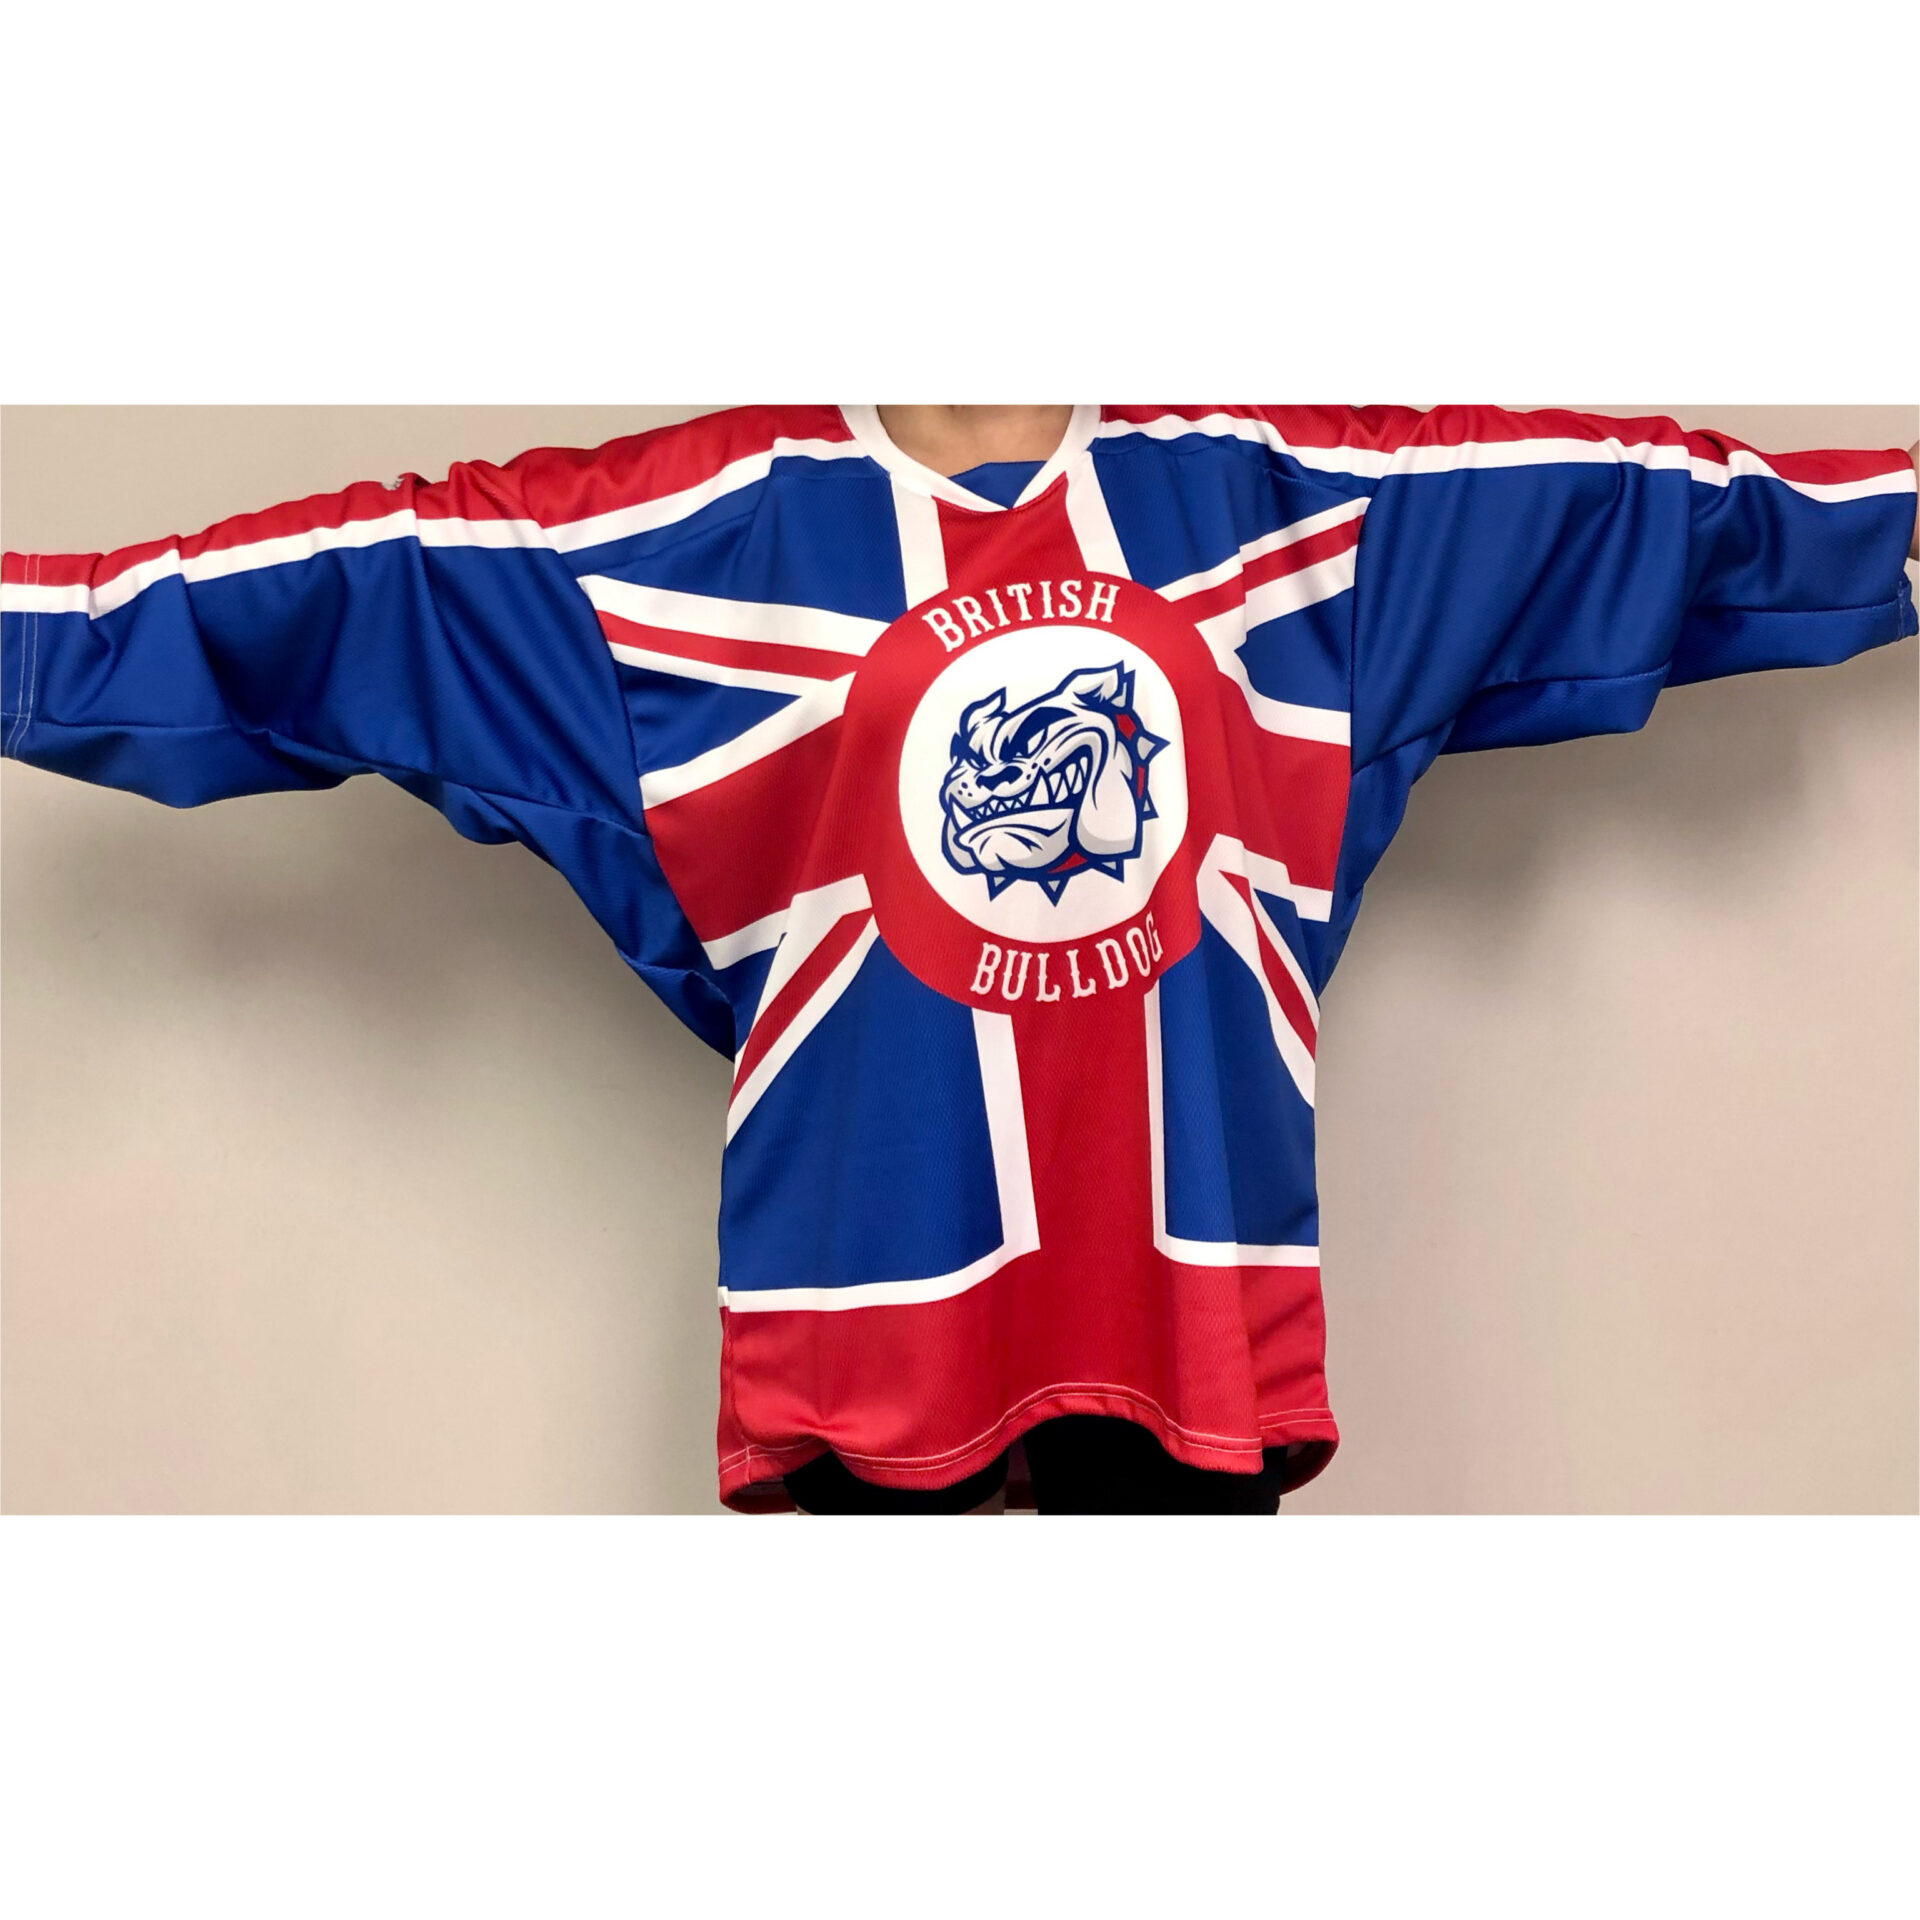 British Bulldog hockey jersey with Red and shoulders. Sizes: Small – 5X. – Mess Bucket Comics